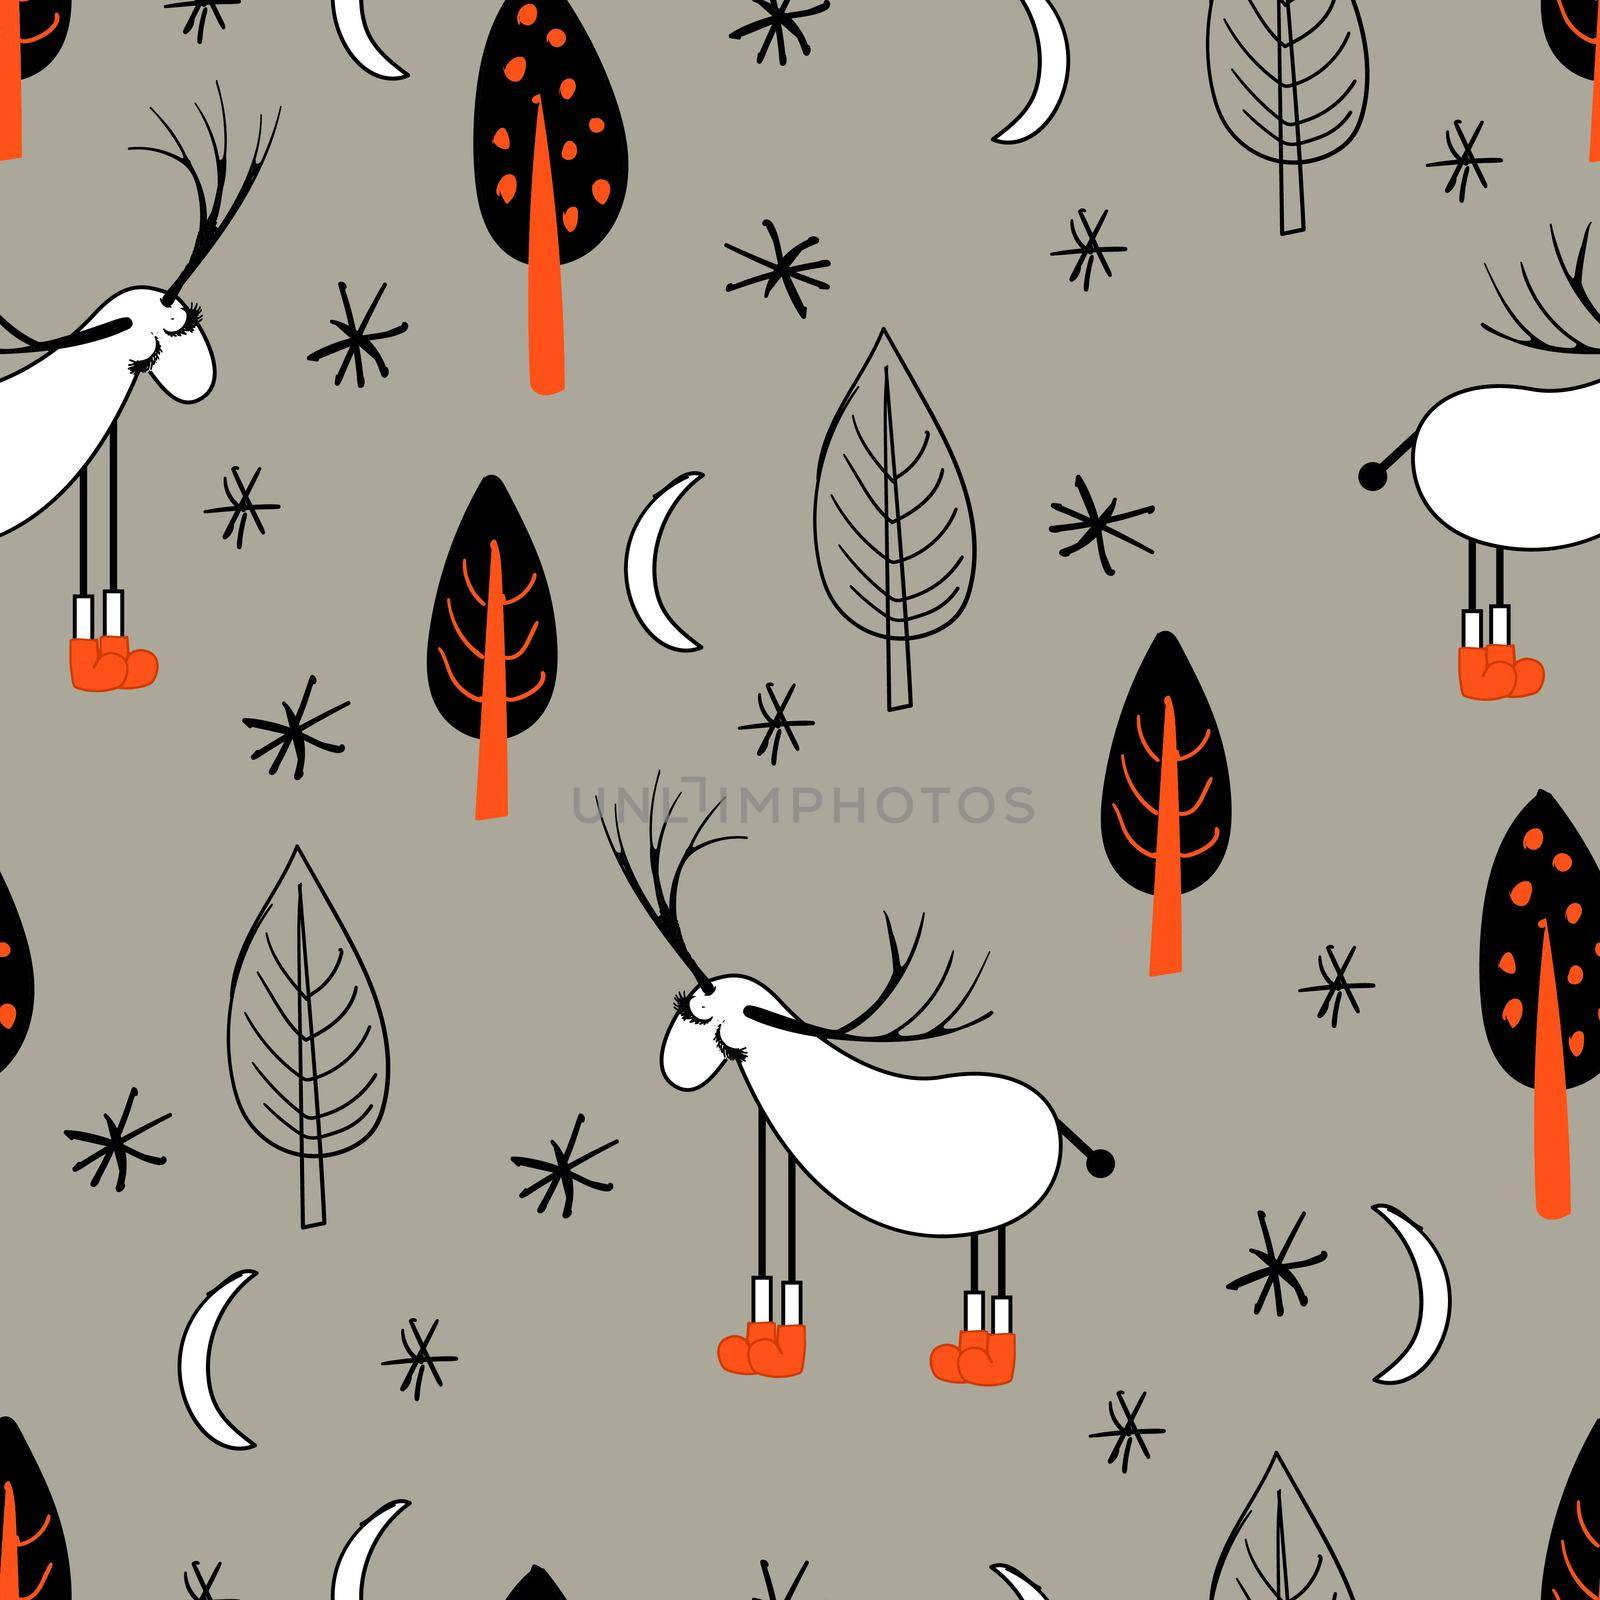 Reindeer. An animal with horns. Illustration in folk style. Stylized mountains. Scandinavian print. Seamless pattern for kids.